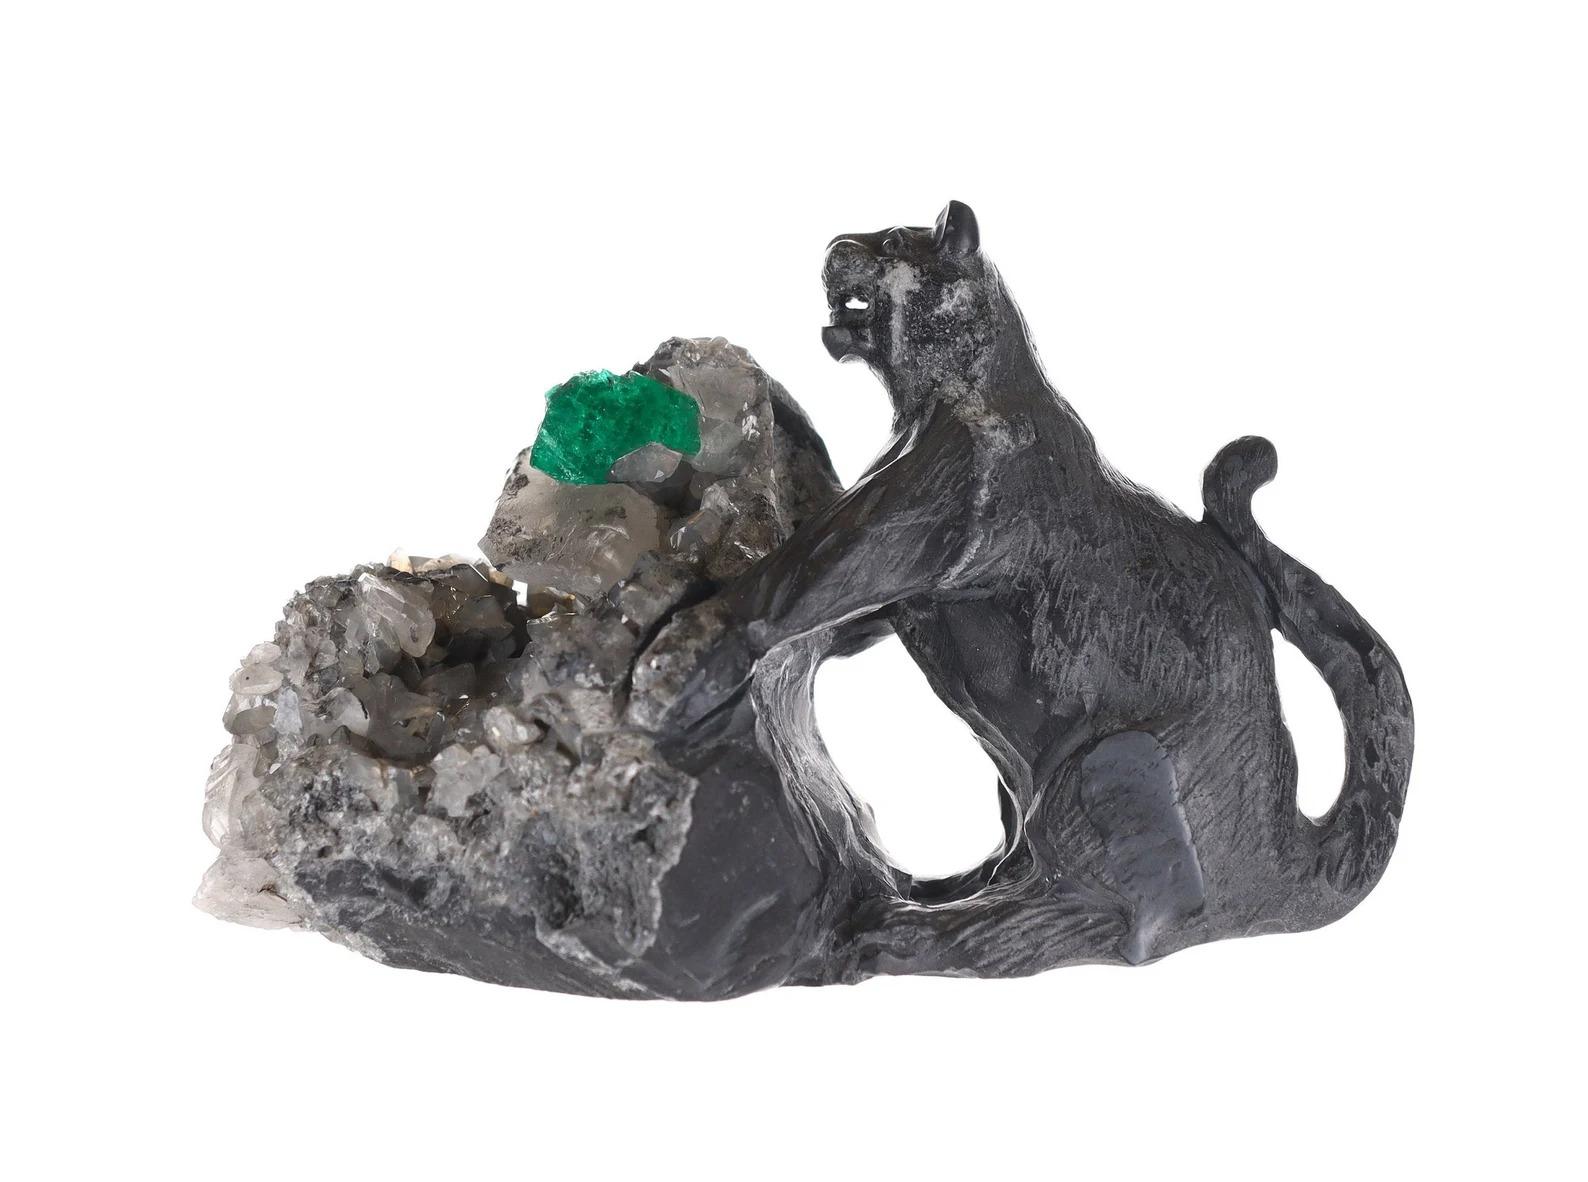 This beautiful and one-of-a-kind rough Colombian emerald sculpture. It displays an exotic, and rare black panther made of black and gray shale with a hint of pyrite that is stalking its prey. The rough Colombian emerald can be found on the mountain,